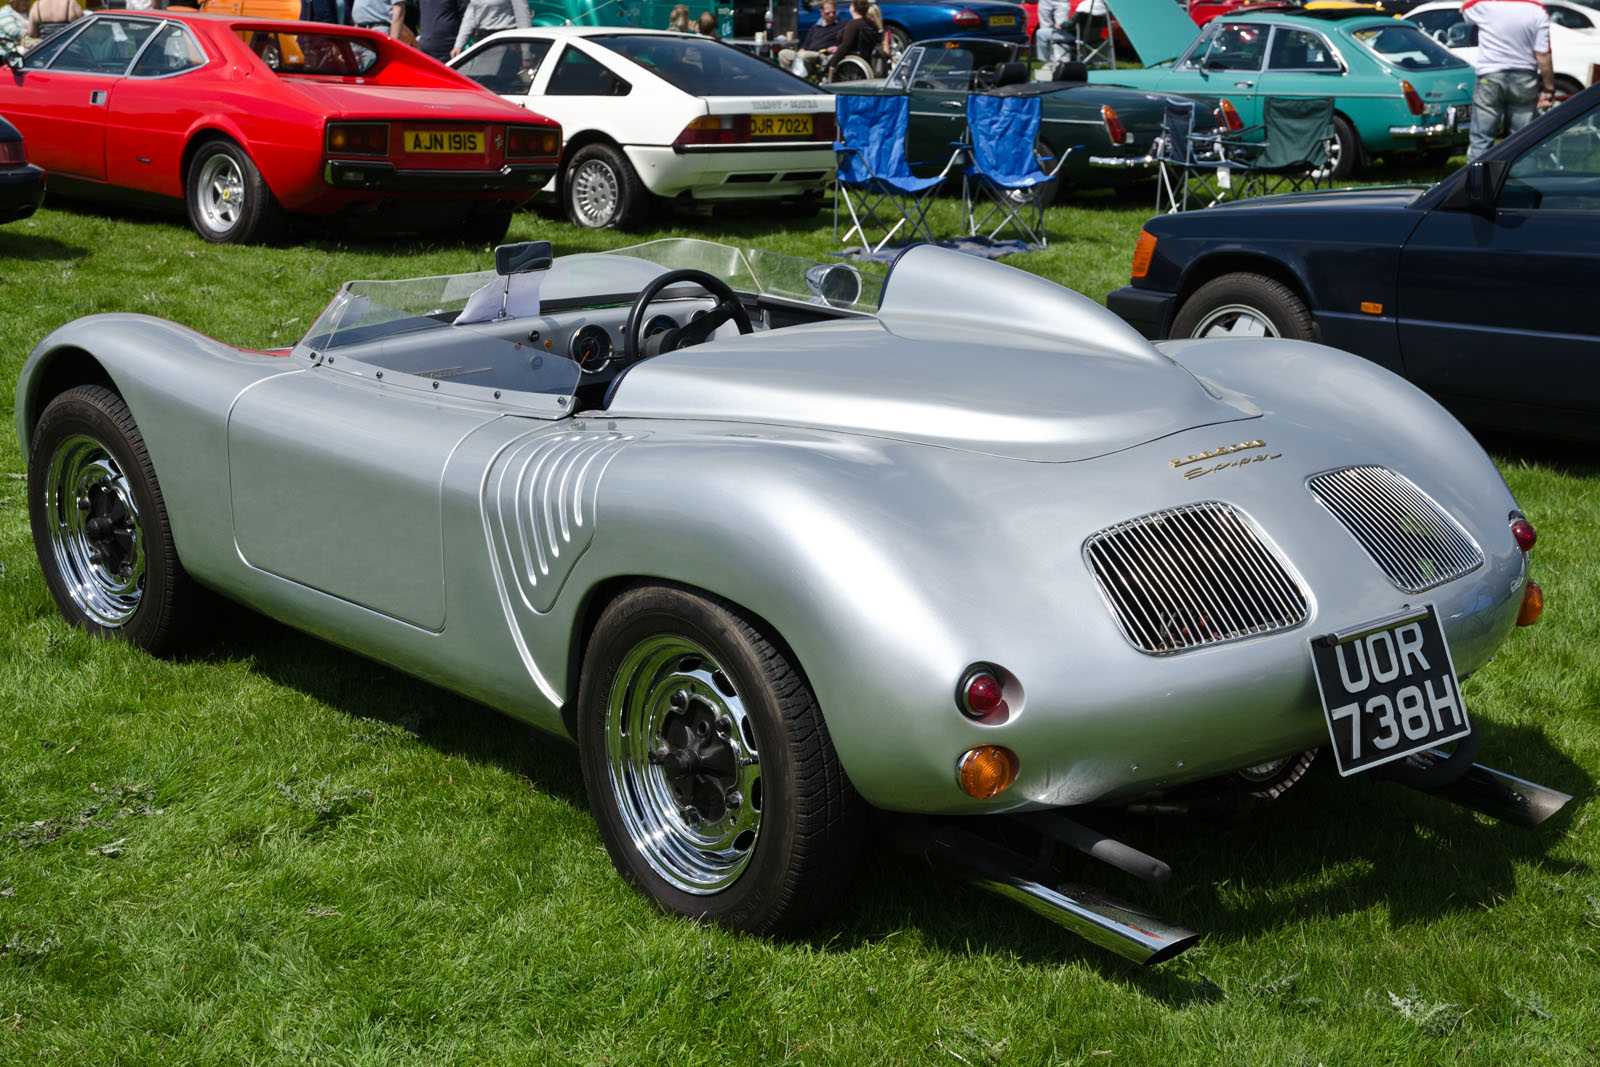 a silver car is on display at a car show